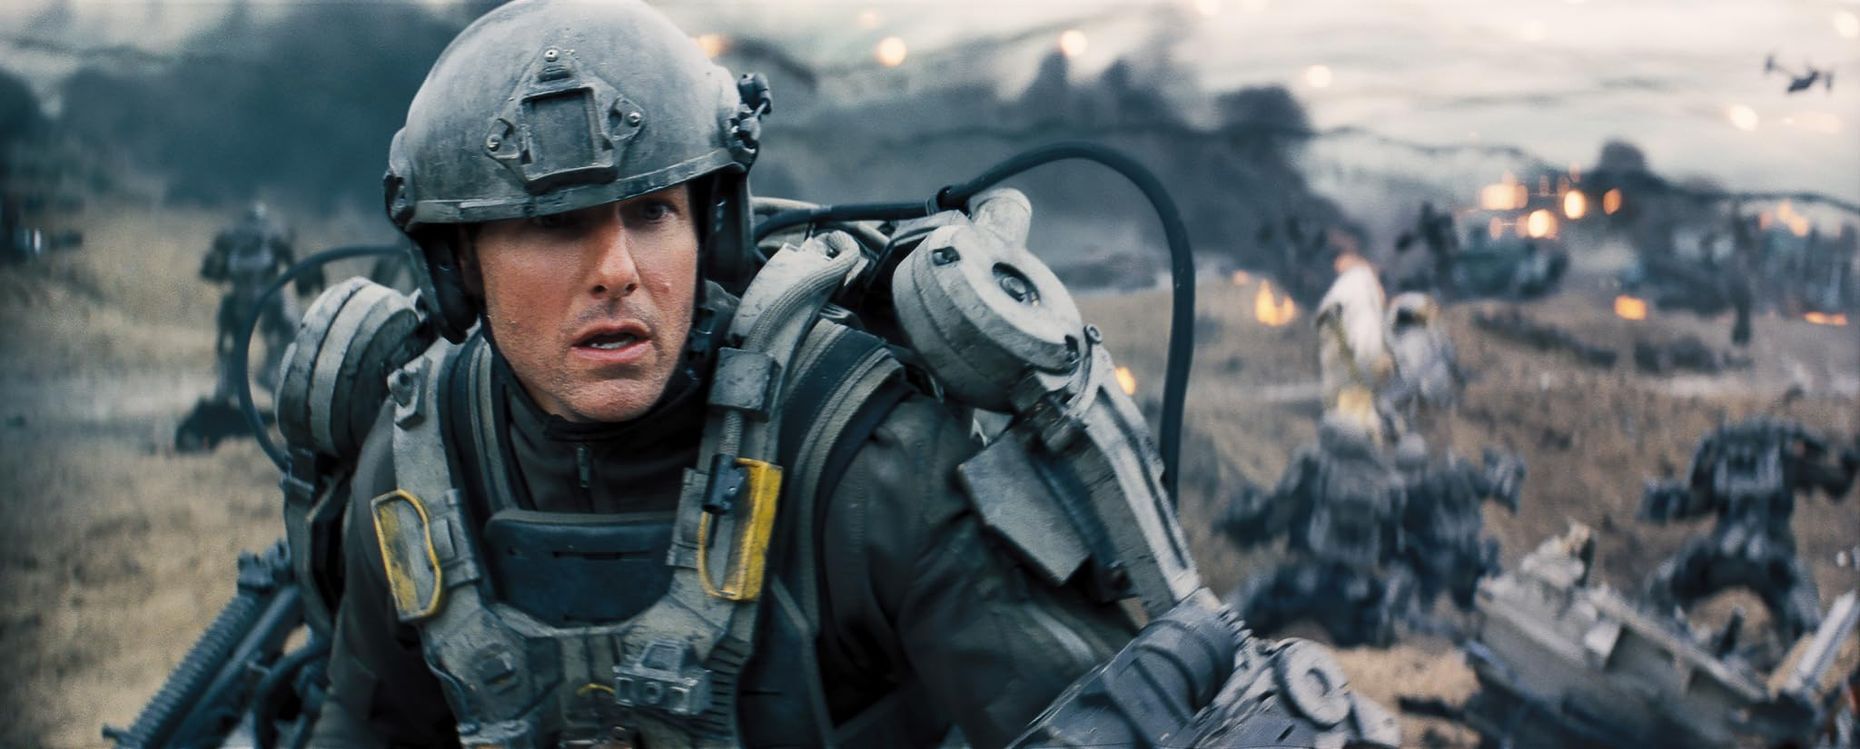 <p>Boasting a solid <a href="https://www.rottentomatoes.com/m/live_die_repeat_edge_of_tomorrow">90% Fresh audience score</a> on Rotten Tomatoes, Doug Liman’s <em>Edge of Tomorrow</em> is a gripping sci-fi adventure with a <em>Groundhog Day</em>-like premise. In the aftermath of a devastating alien invasion, Major William Cage, played by Tom Cruise, is killed on the battlefield—only to wake up and start the day over again. Critics praised the film for its clever script and edge-of-your-seat action, and applauded Cruise’s performance in <a href="https://www.rogerebert.com/reviews/edge-of-tomorrow-2014">“a complex and demanding role.”</a></p>